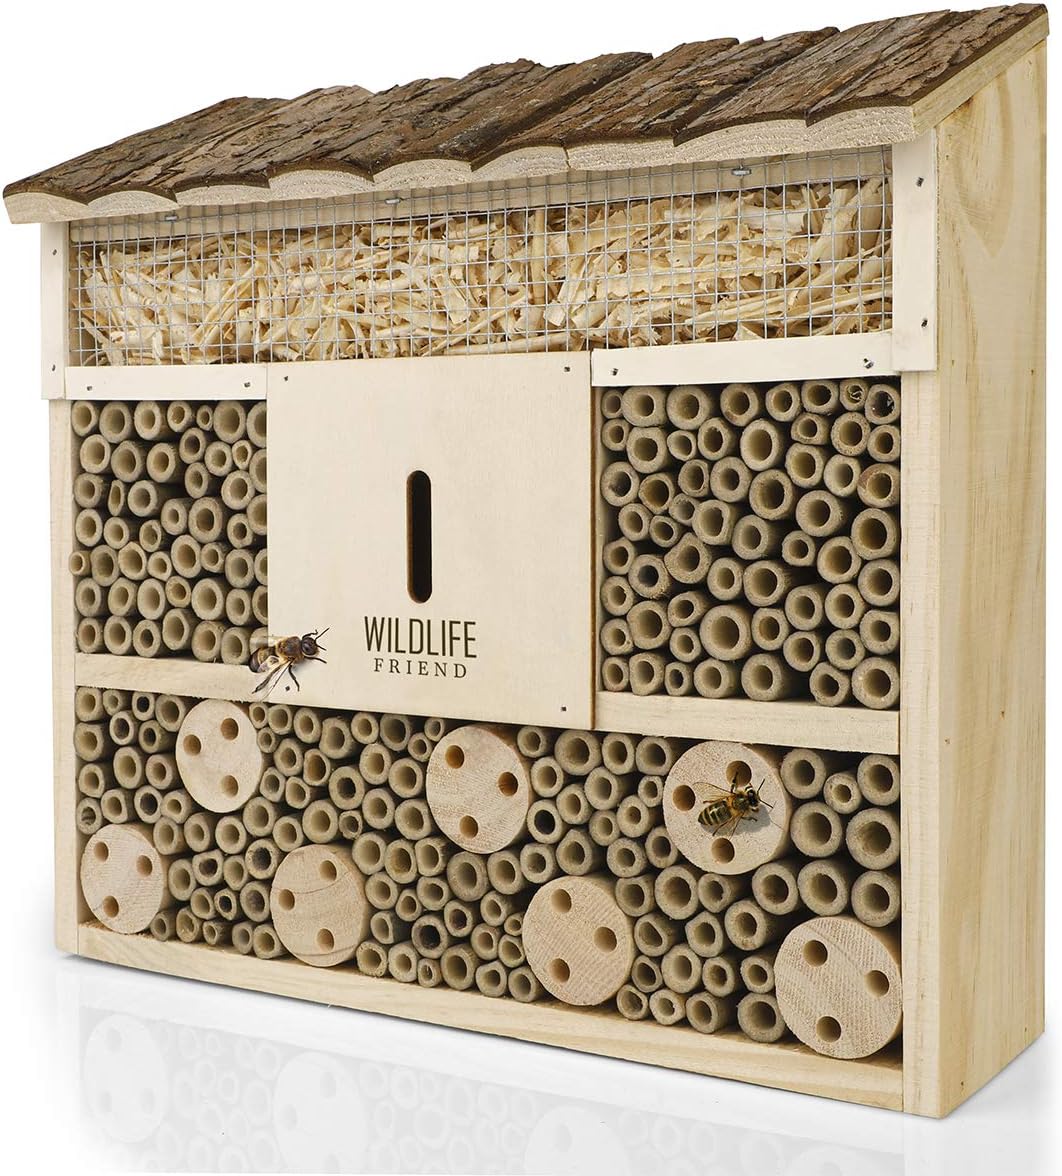 Wildlife Friend I Bee Hotel Insect Hotel - 29.5 x 28 x 10 cm - untreated, Solid Wood bee House for Bees, Ladybugs & lacewings - Hanging Insect House & Nesting aid